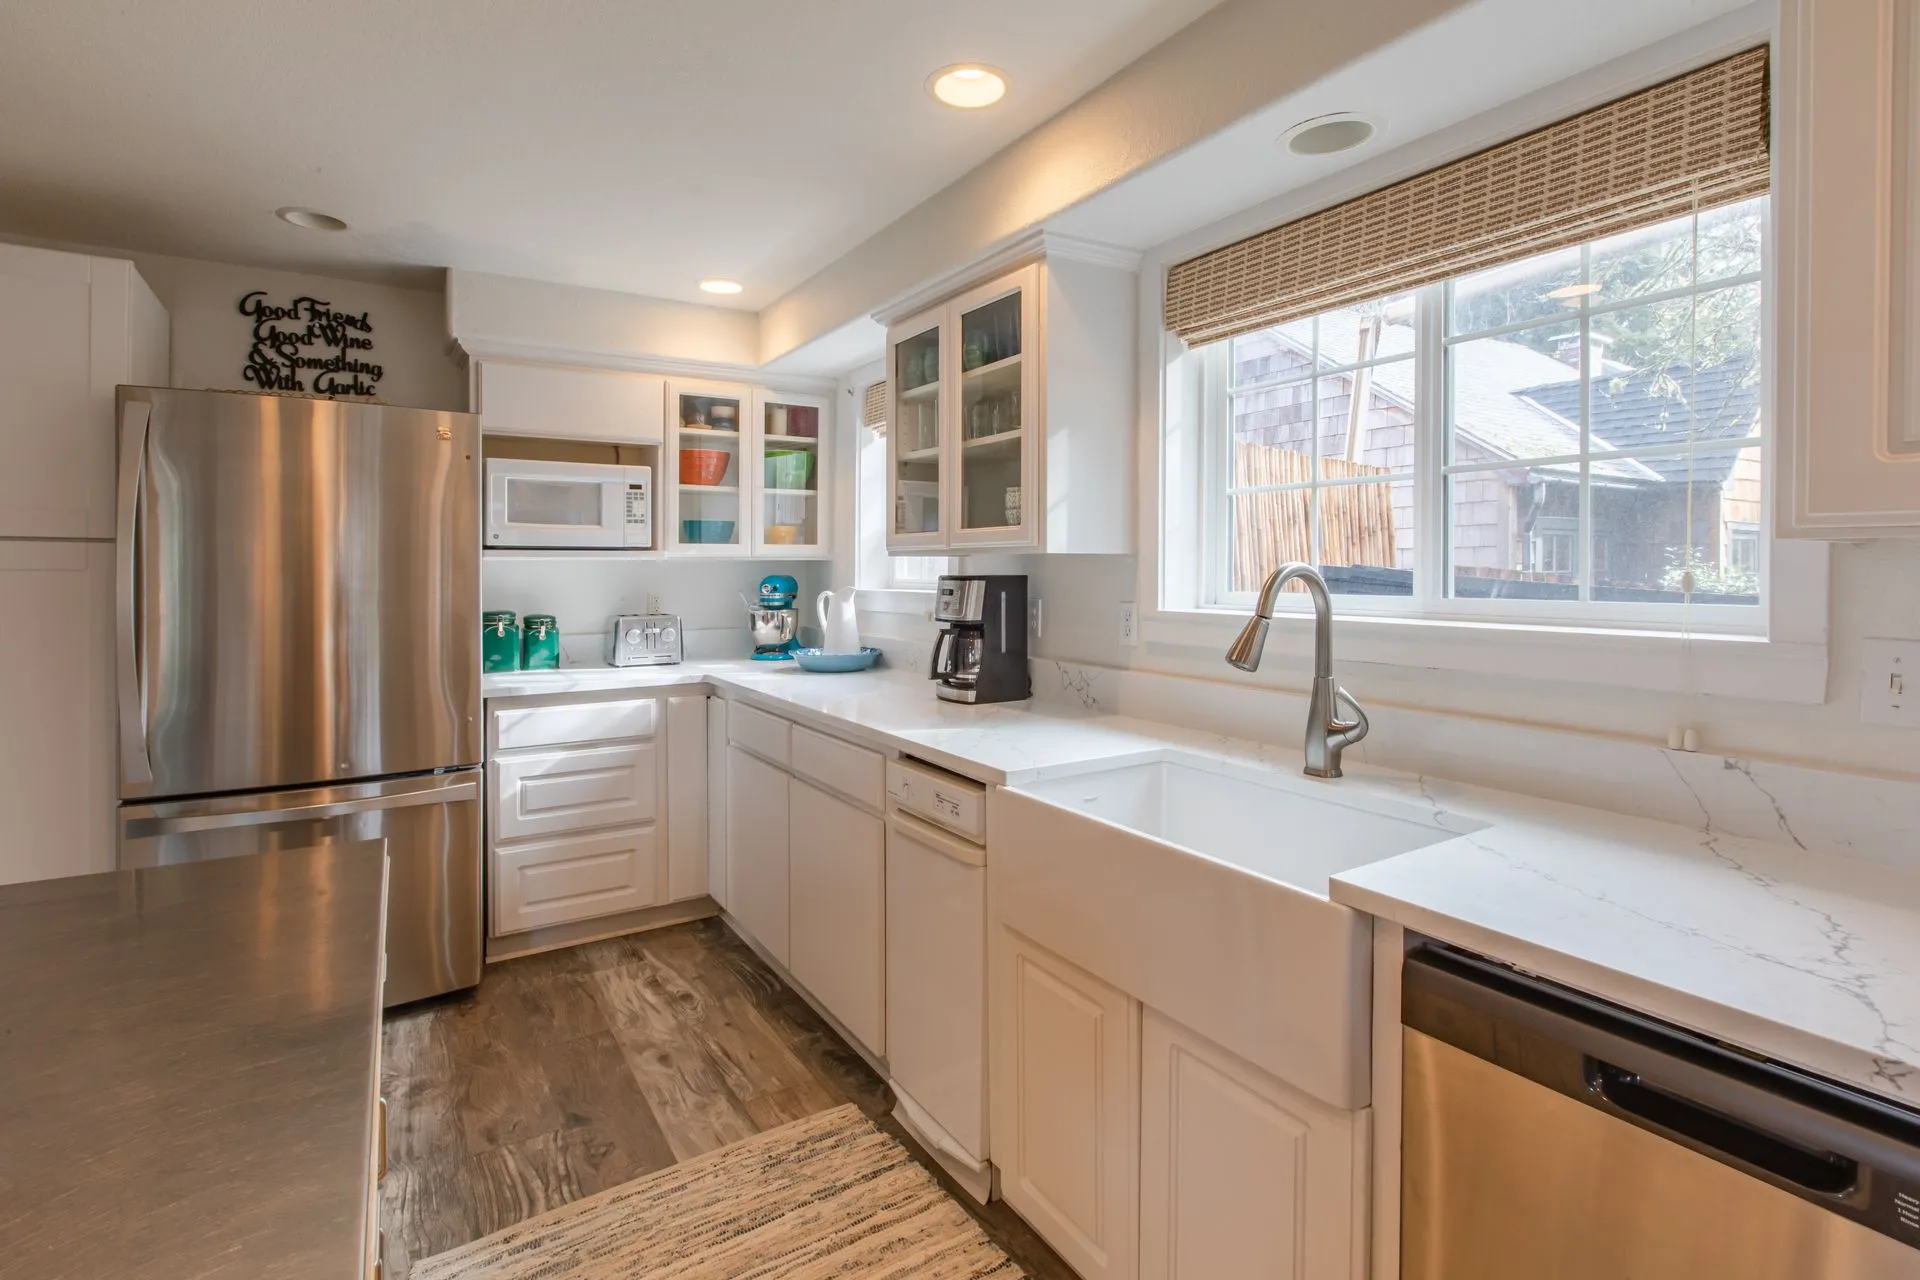 Vacation Rental in Cannon Beach, Puffin Nest kitchen with fridge and sink